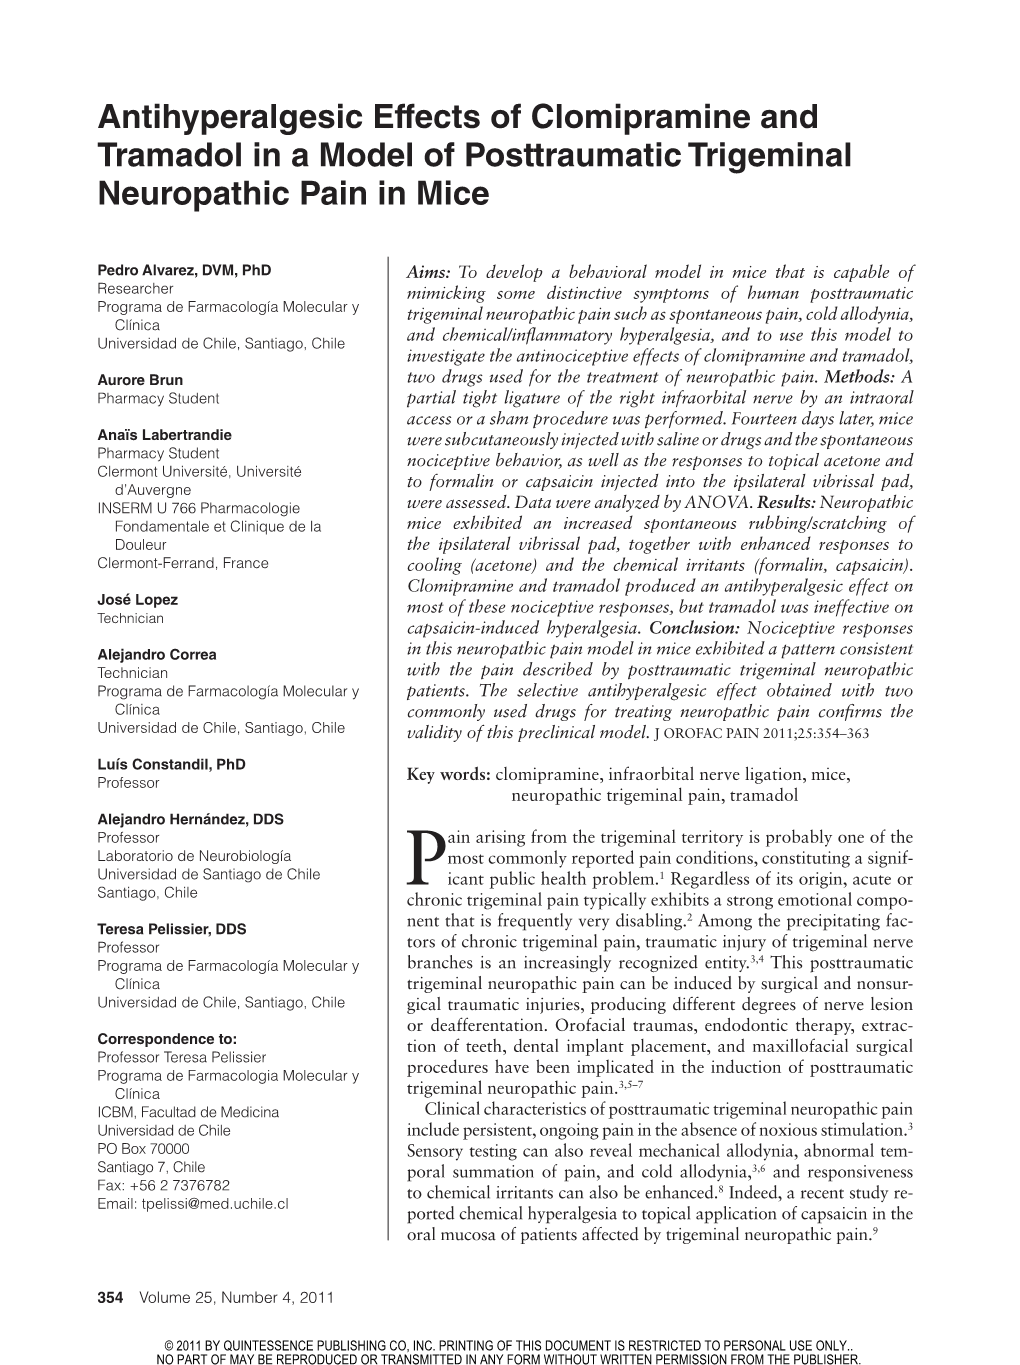 Antihyperalgesic Effects of Clomipramine and Tramadol in a Model of Posttraumatic Trigeminal Neuropathic Pain in Mice